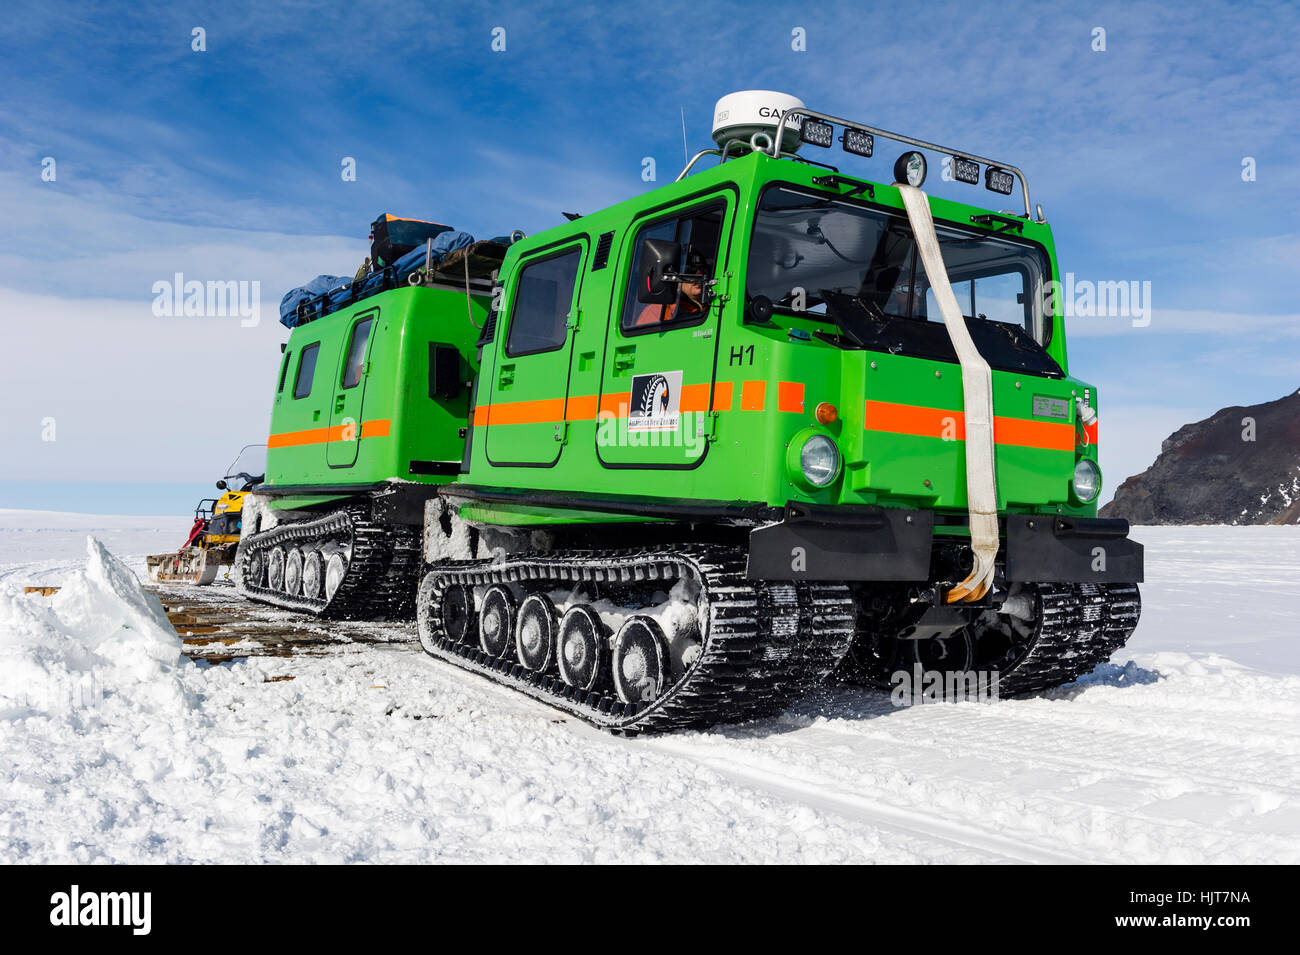 A Hagglund ice vehicle travels over a bridge on sea ice during the Antarctic summer. Stock Photo